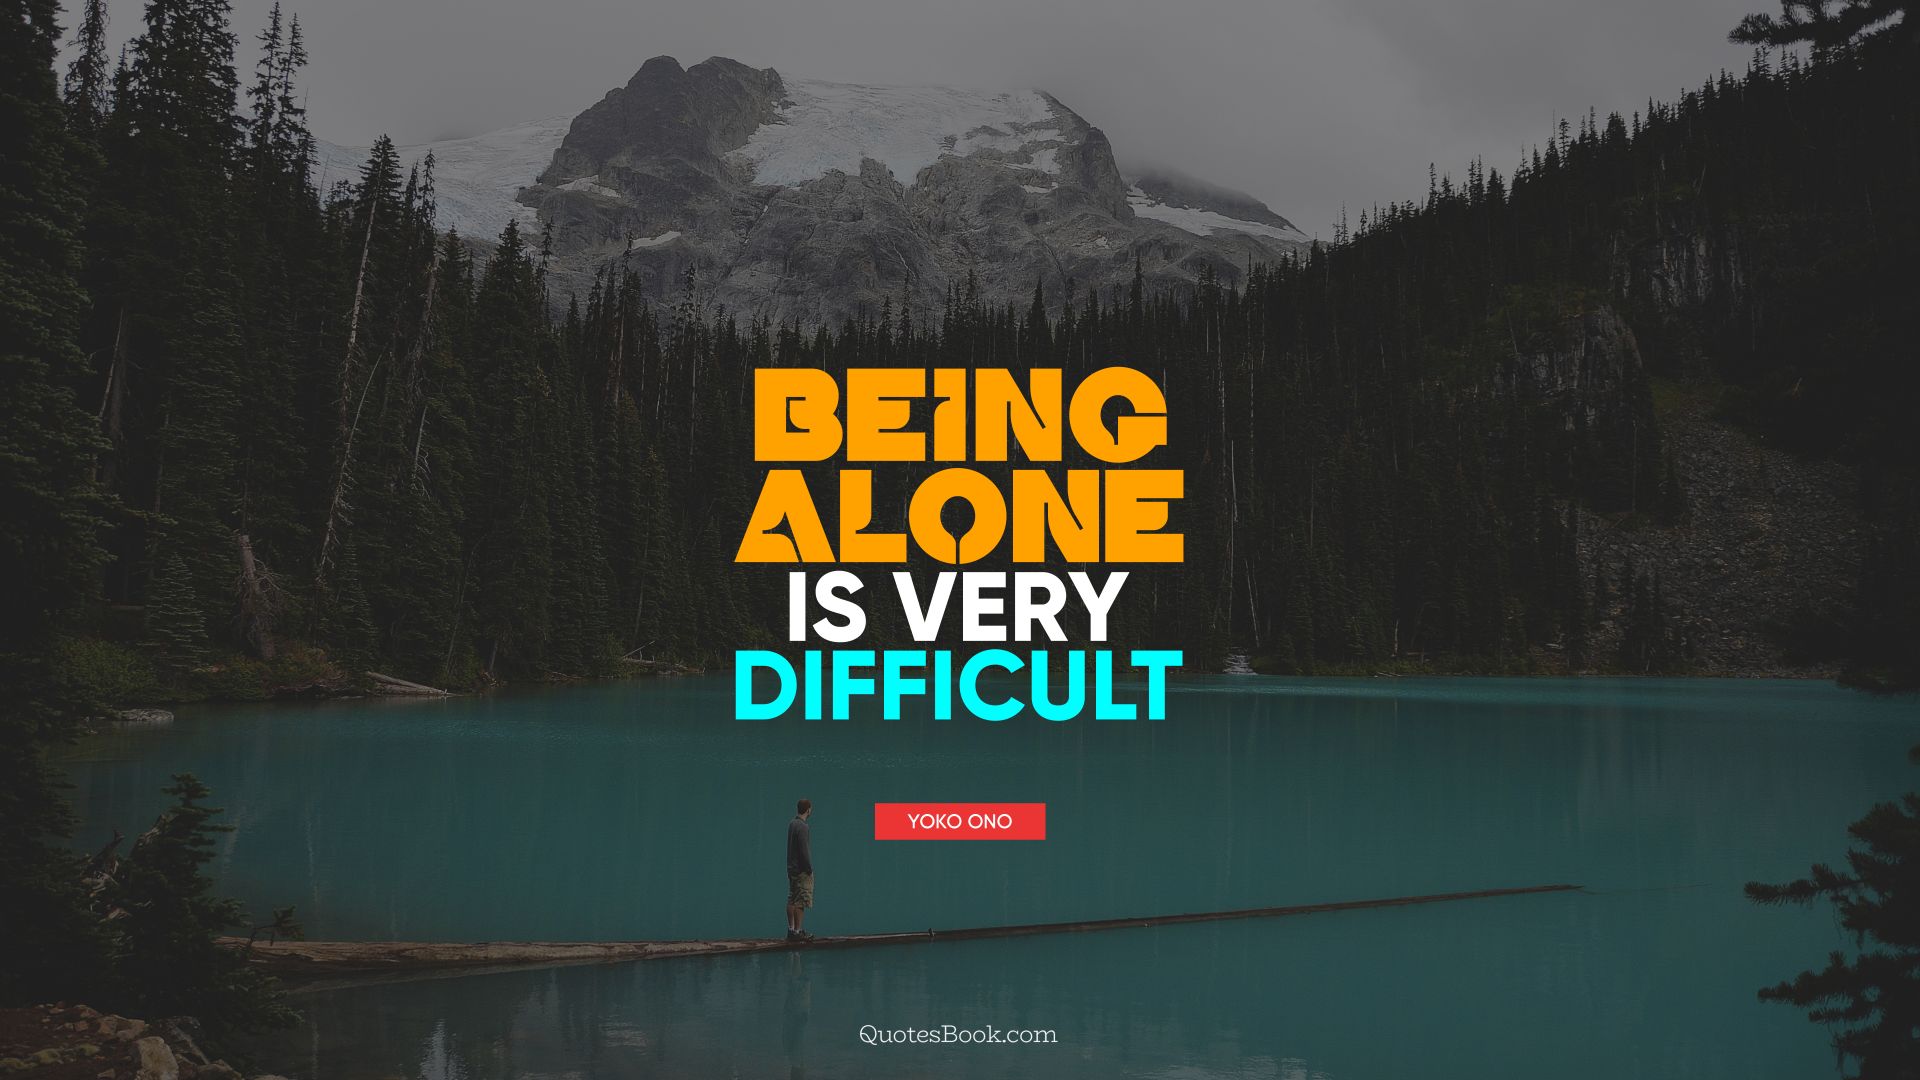 Being alone is very difficult. - Quote by Yoko Ono